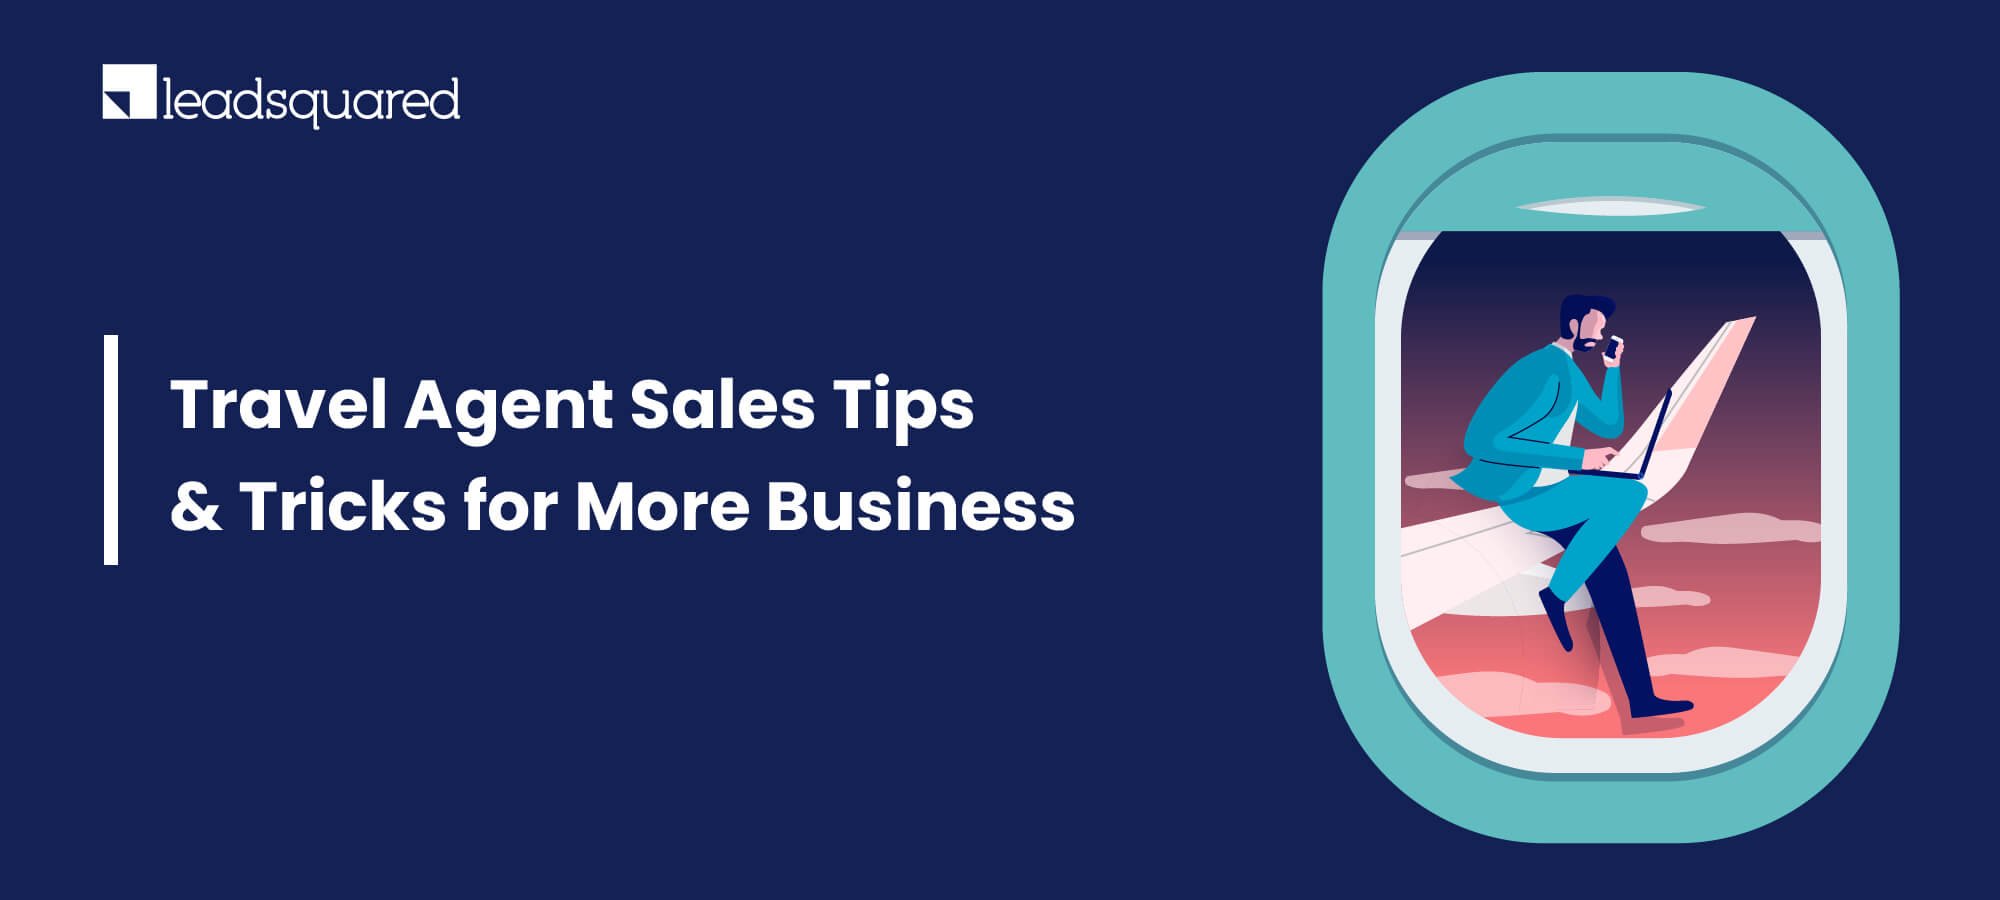 Travel Agent Tips & Tricks for More Sales - LeadSquared